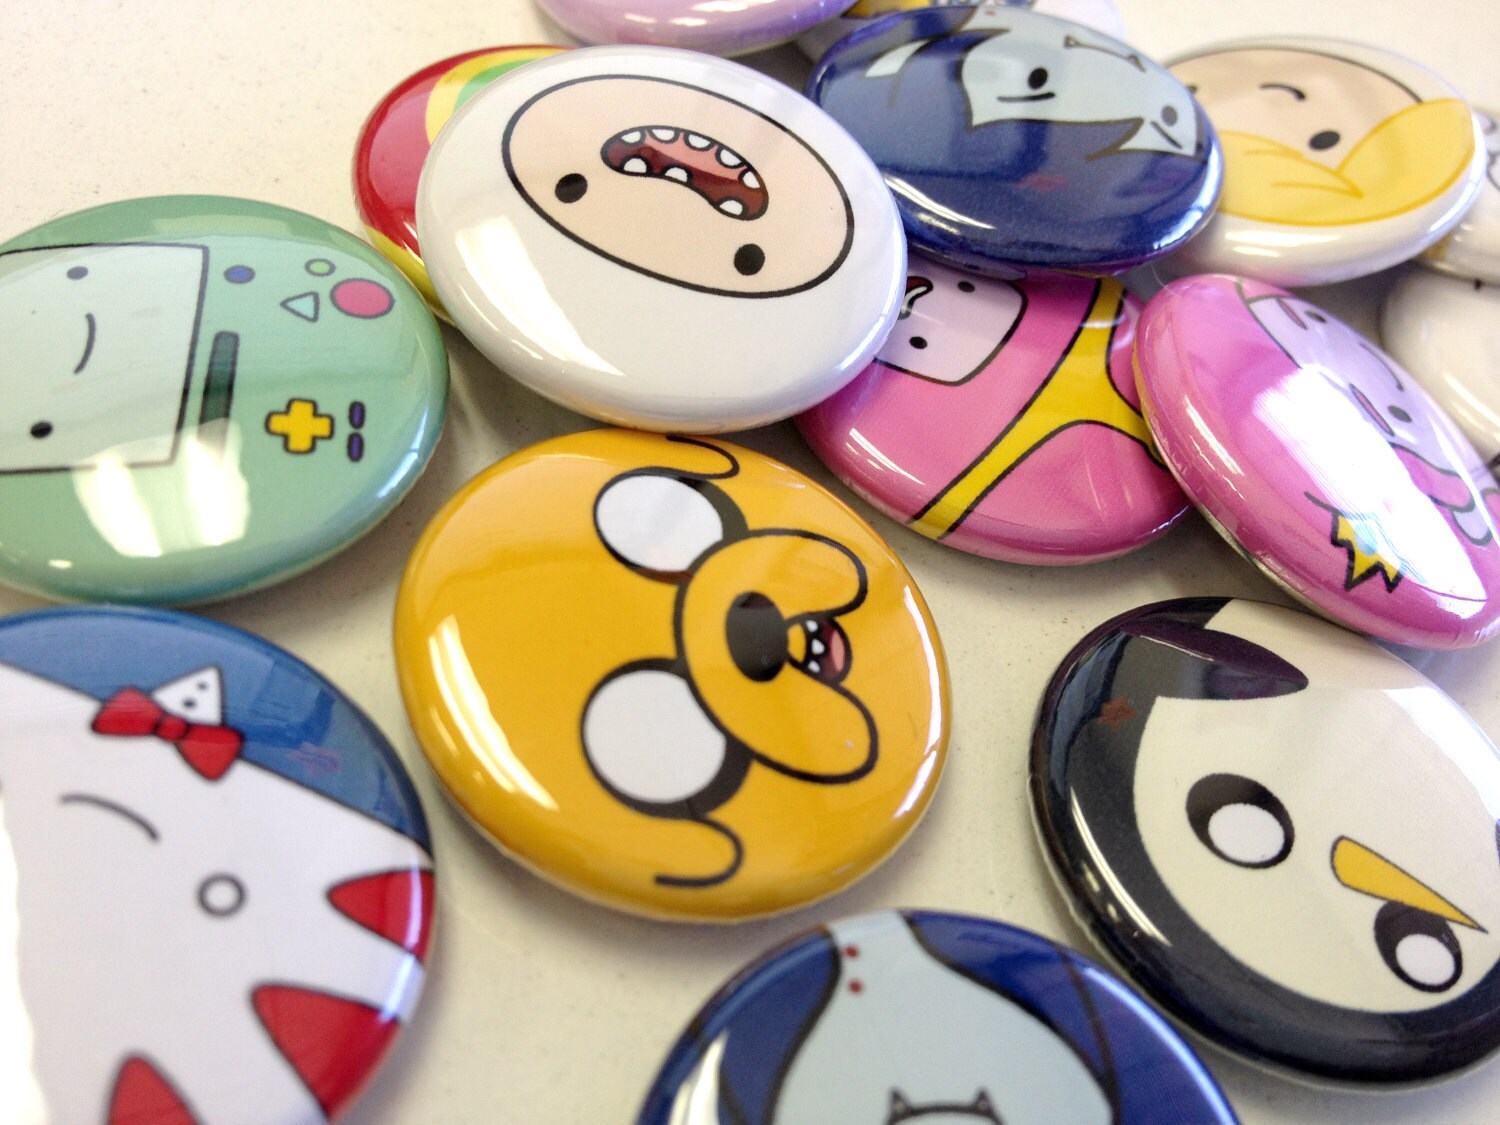 Adventure Time 1 Button Pin Set By Rosewine On Etsy